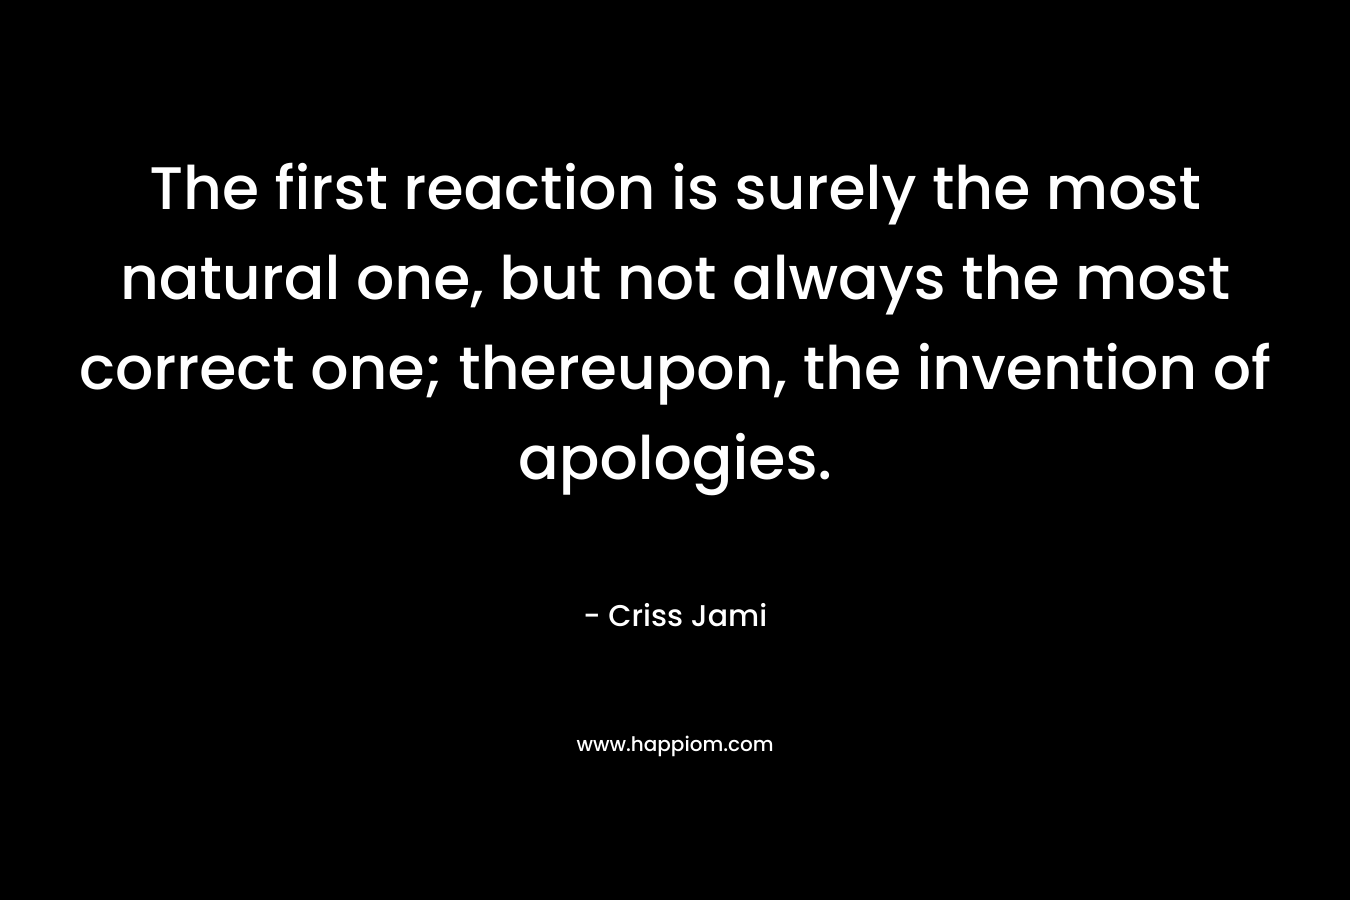 The first reaction is surely the most natural one, but not always the most correct one; thereupon, the invention of apologies. – Criss Jami